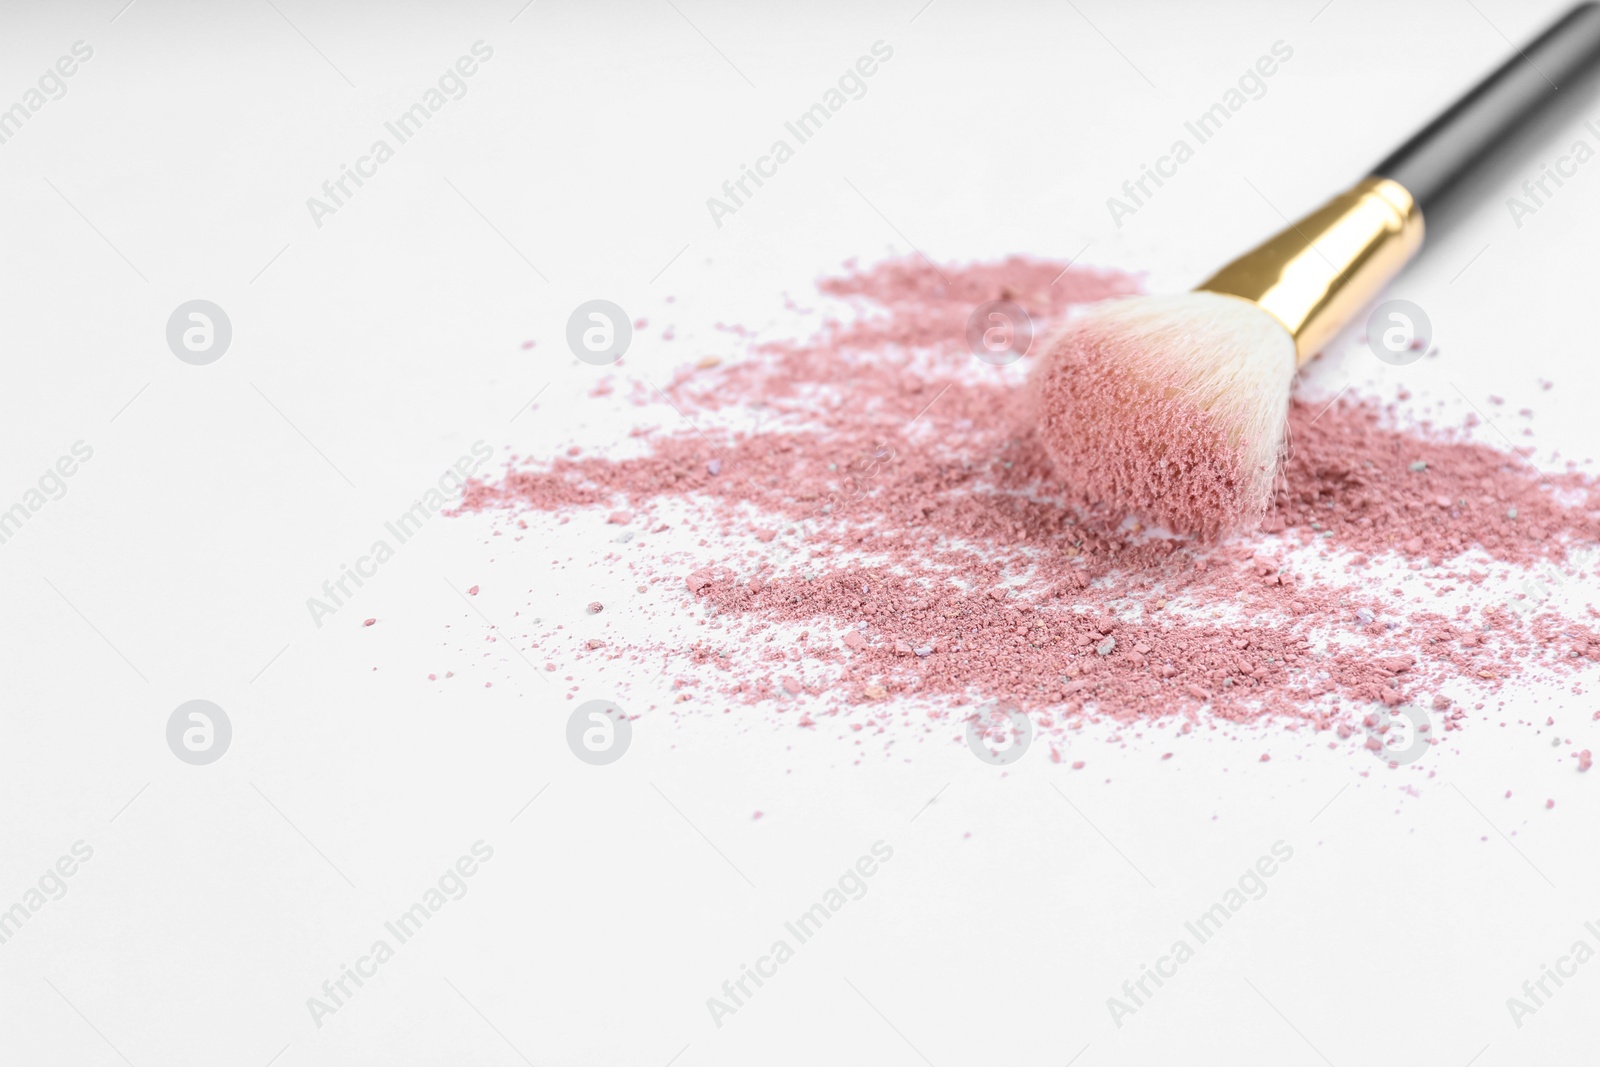 Photo of Makeup brush with crushed cosmetic product on light background. Space for text